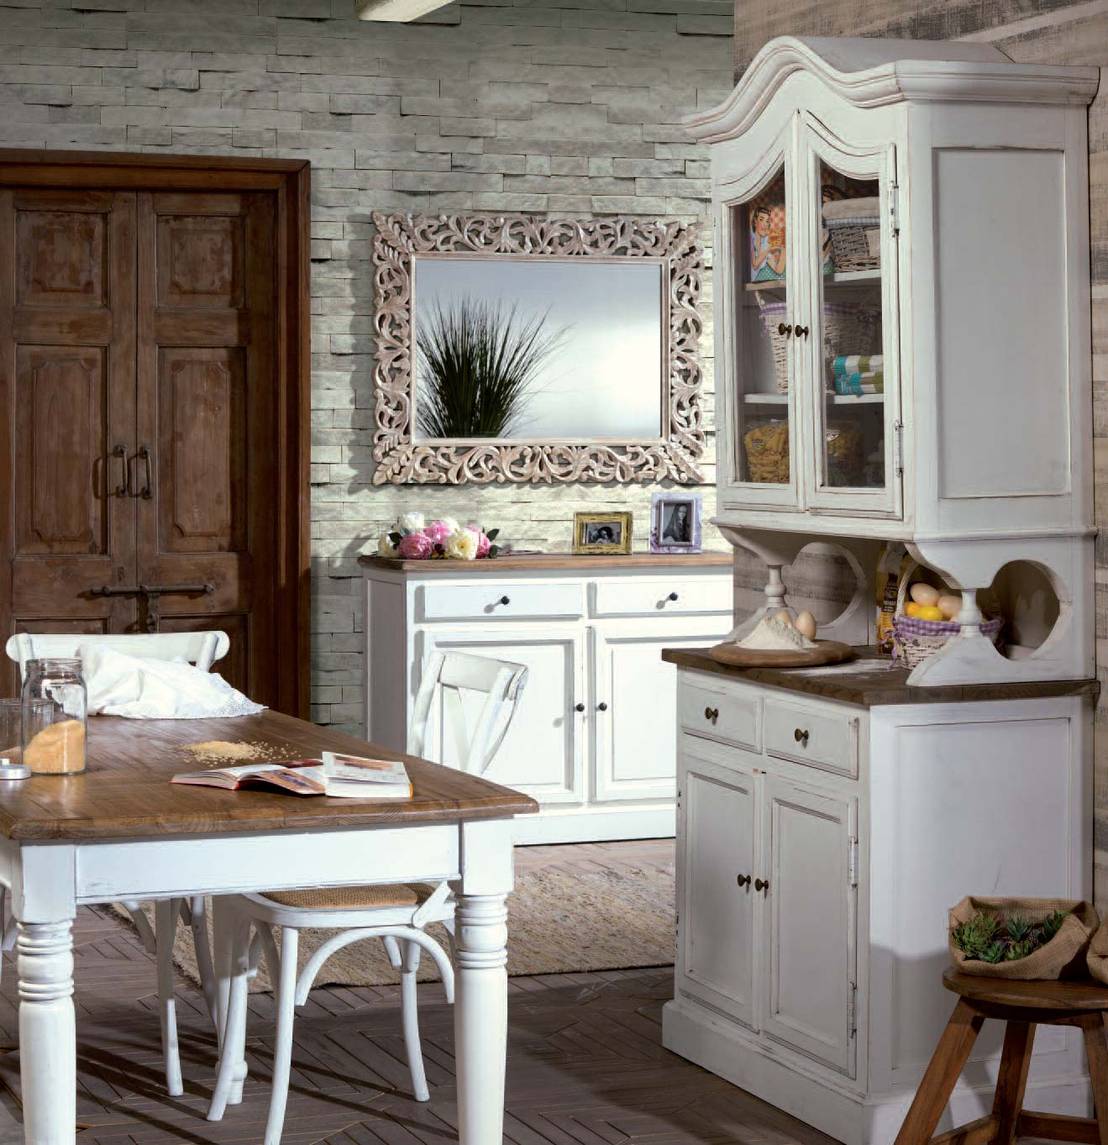 6 Beautiful Shabby Chic Kitchen Designs for New Kitchen 